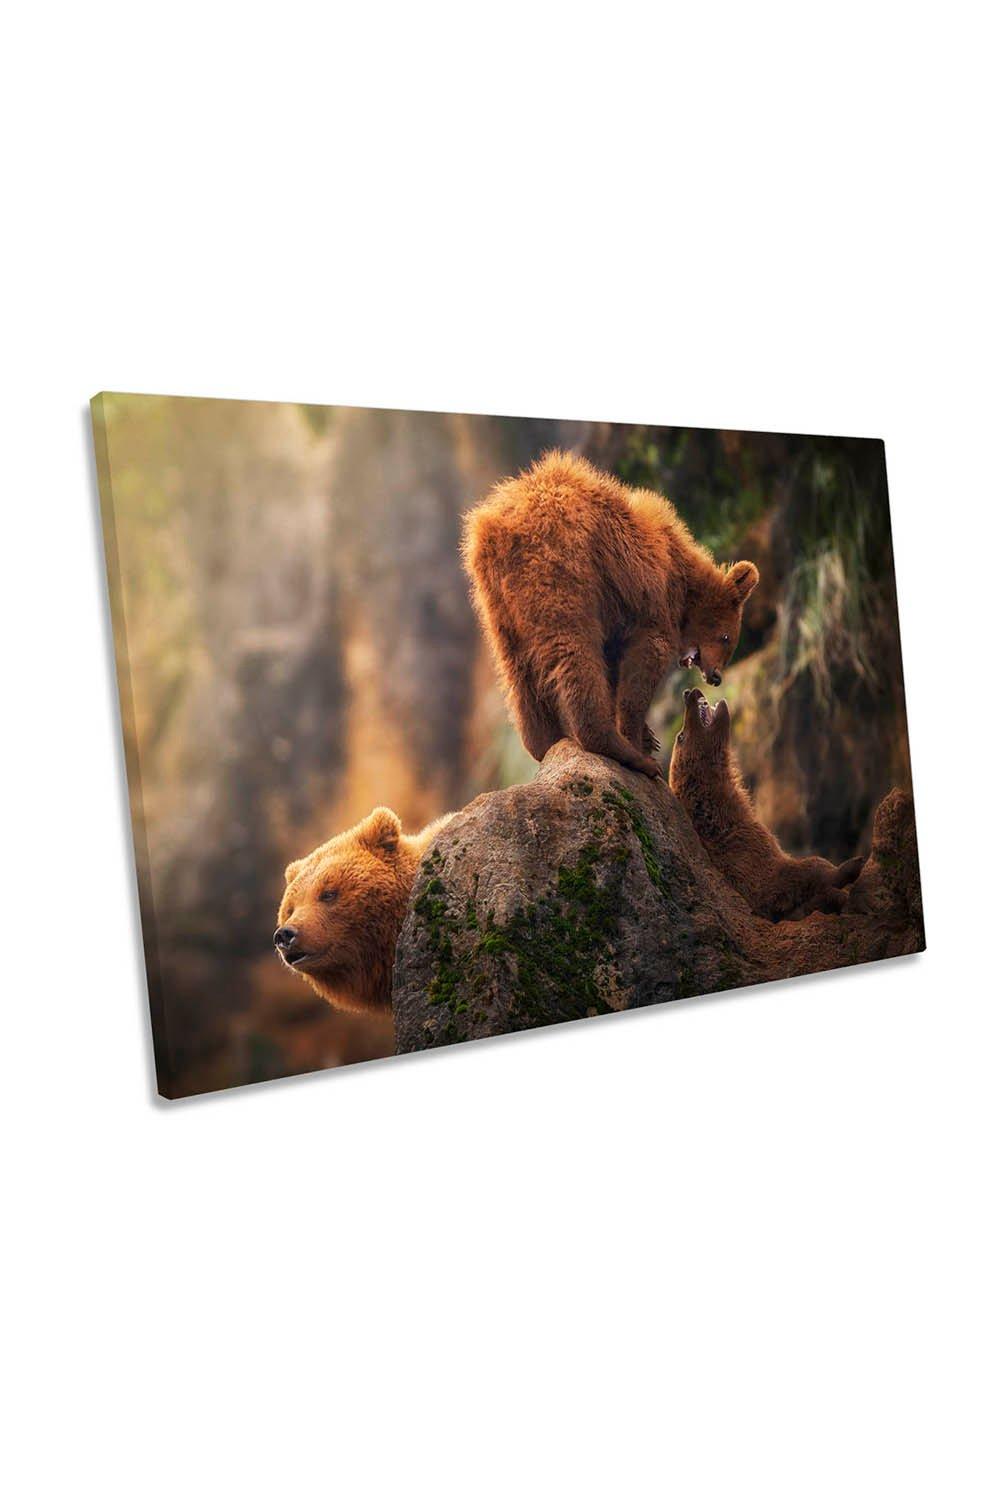 Games on the Heights Brown Bears Playing Canvas Wall Art Picture Print